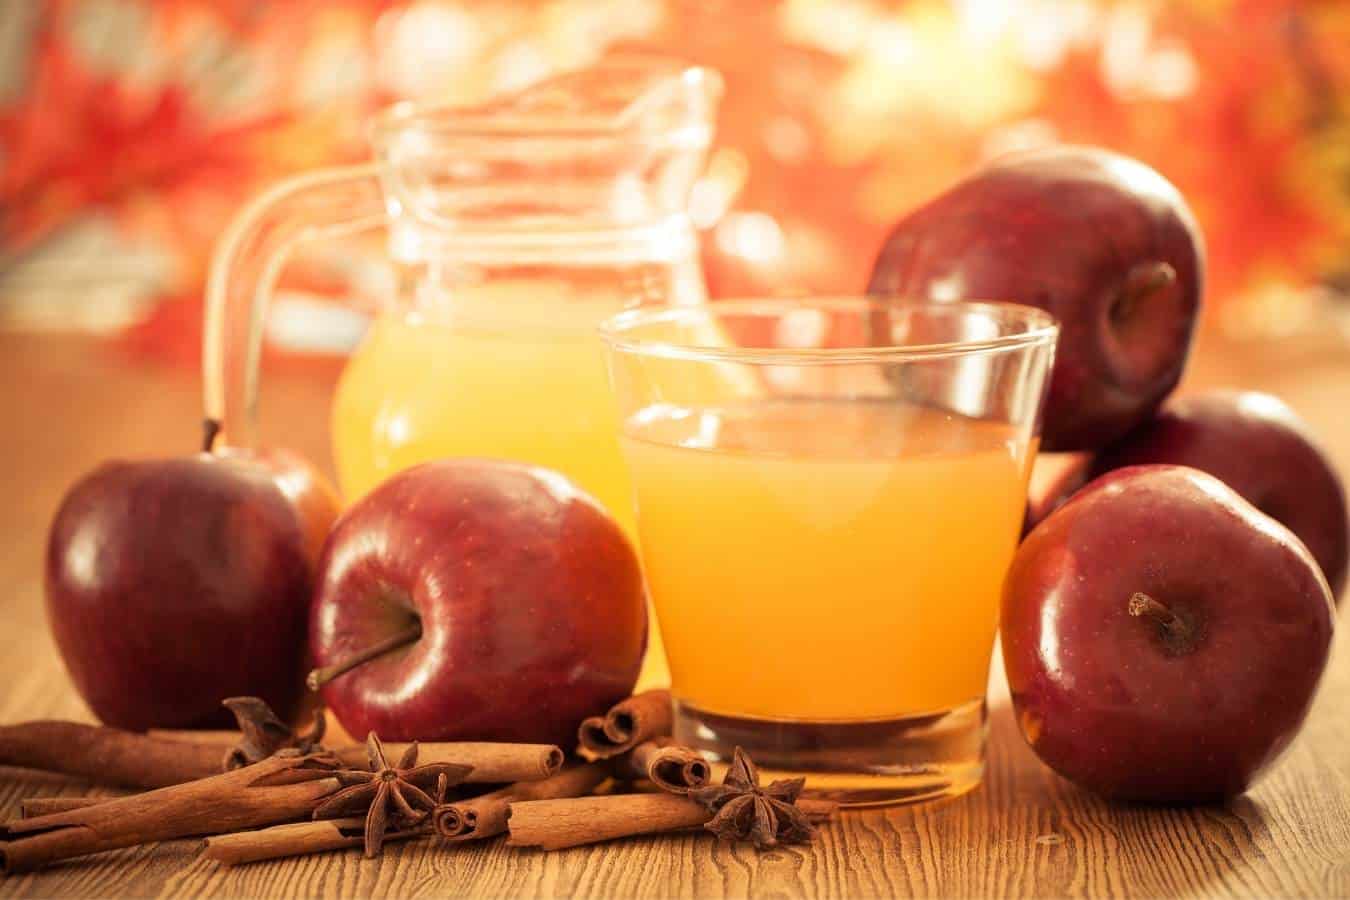 How To Remove Hair Dye With Apple Cider Vinegar